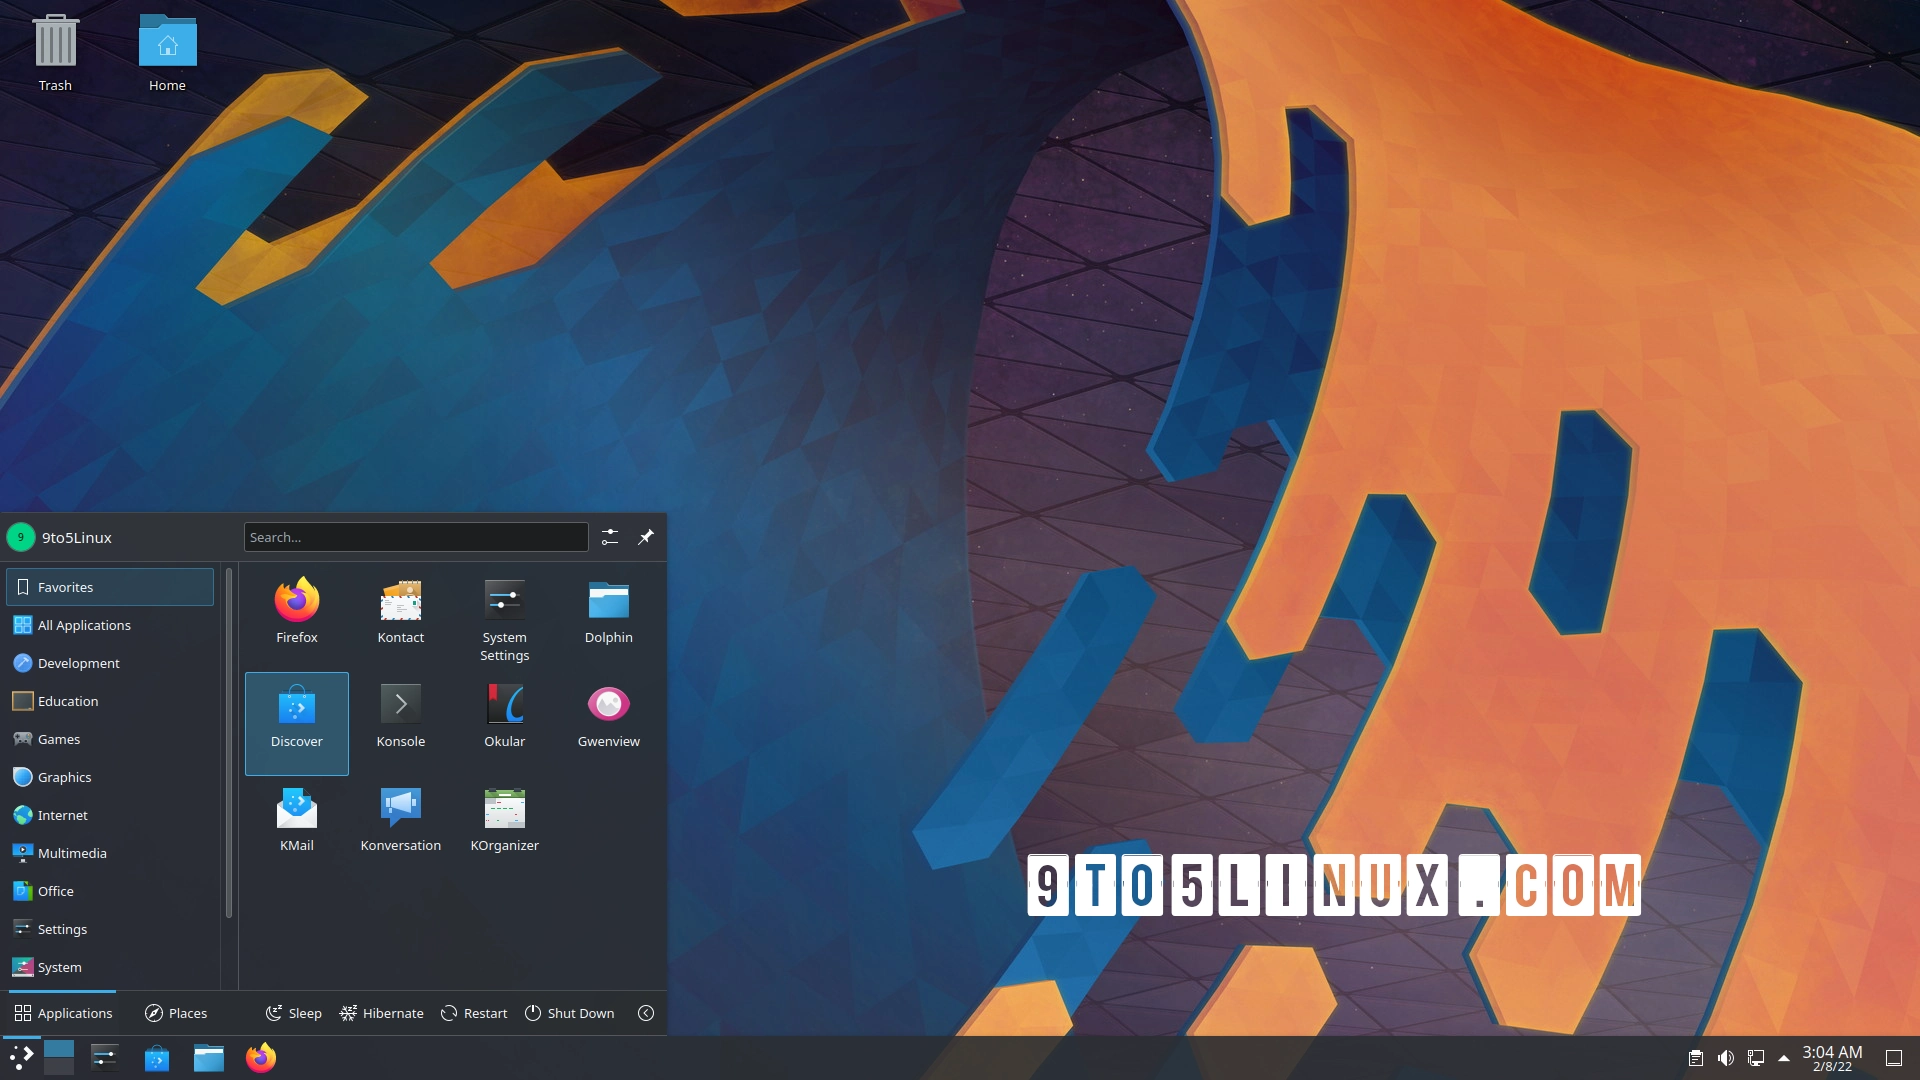 KDE Plasma 5.24 Desktop Environment Officially Released as the Next LTS Series